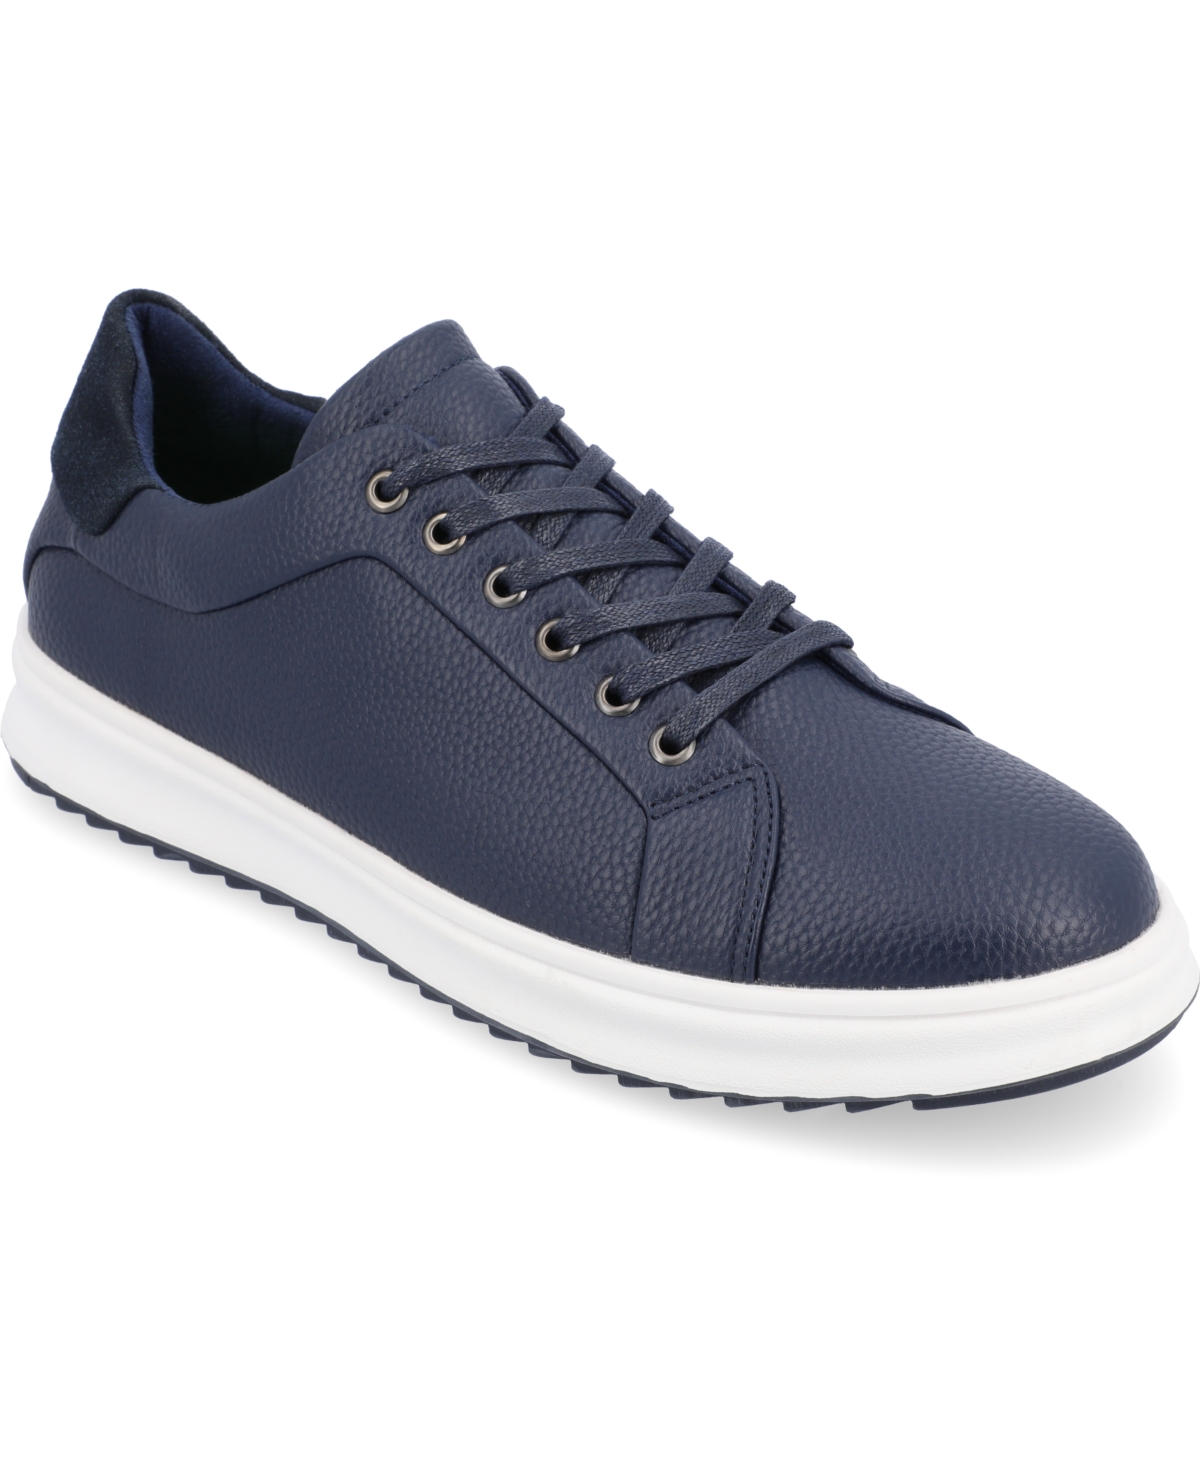 Vance Co. Robby Vegan Leather Casual Sneaker In Navy